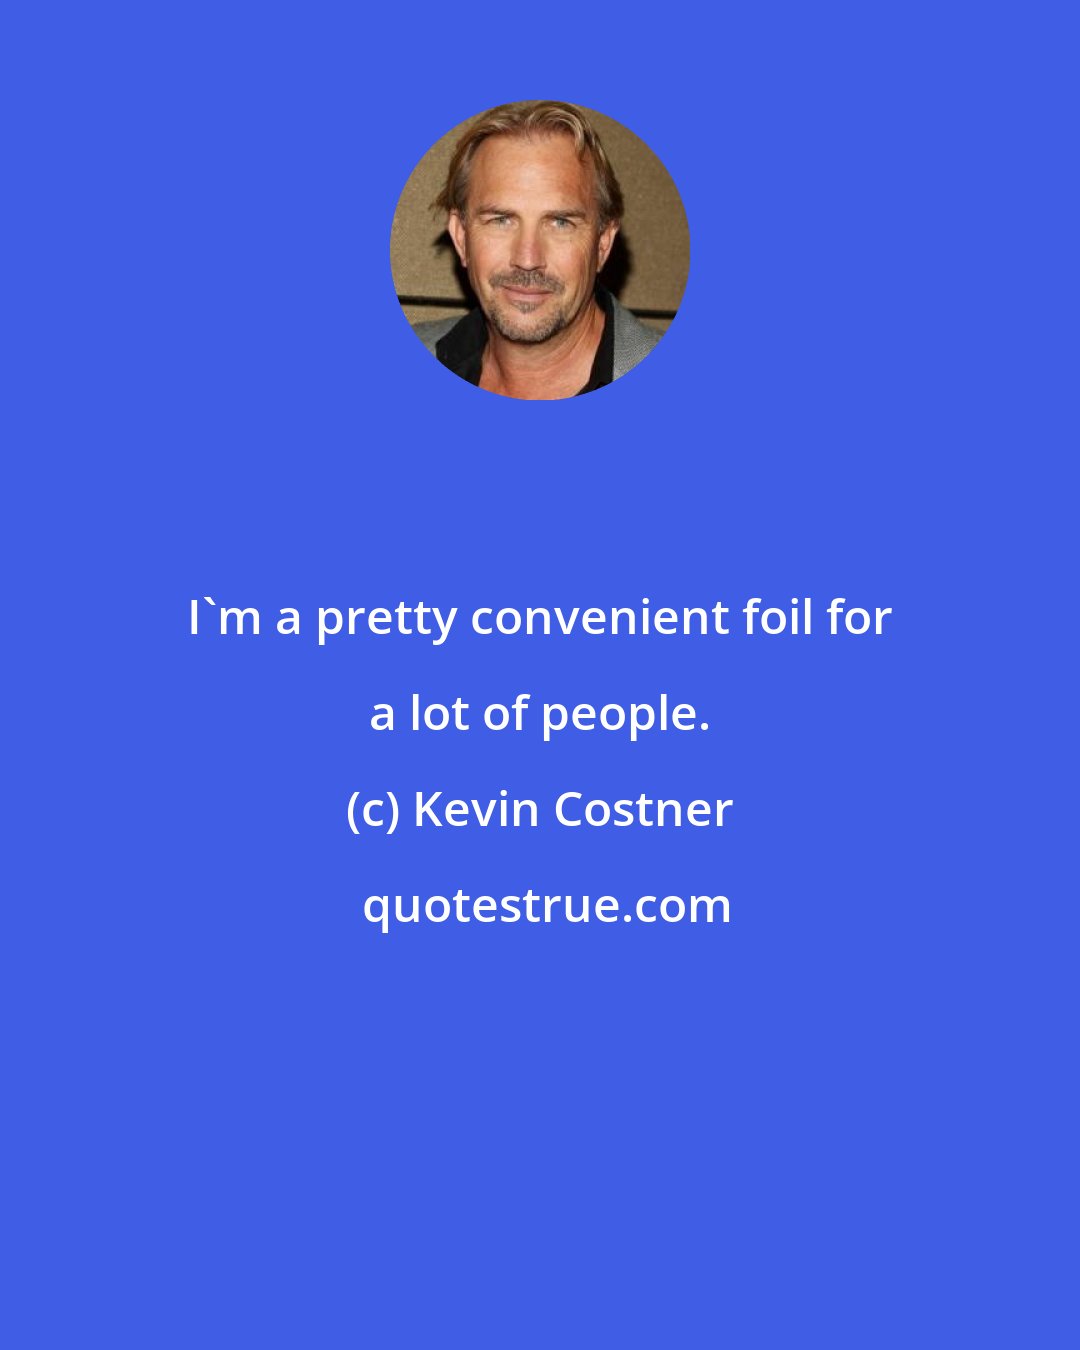 Kevin Costner: I'm a pretty convenient foil for a lot of people.